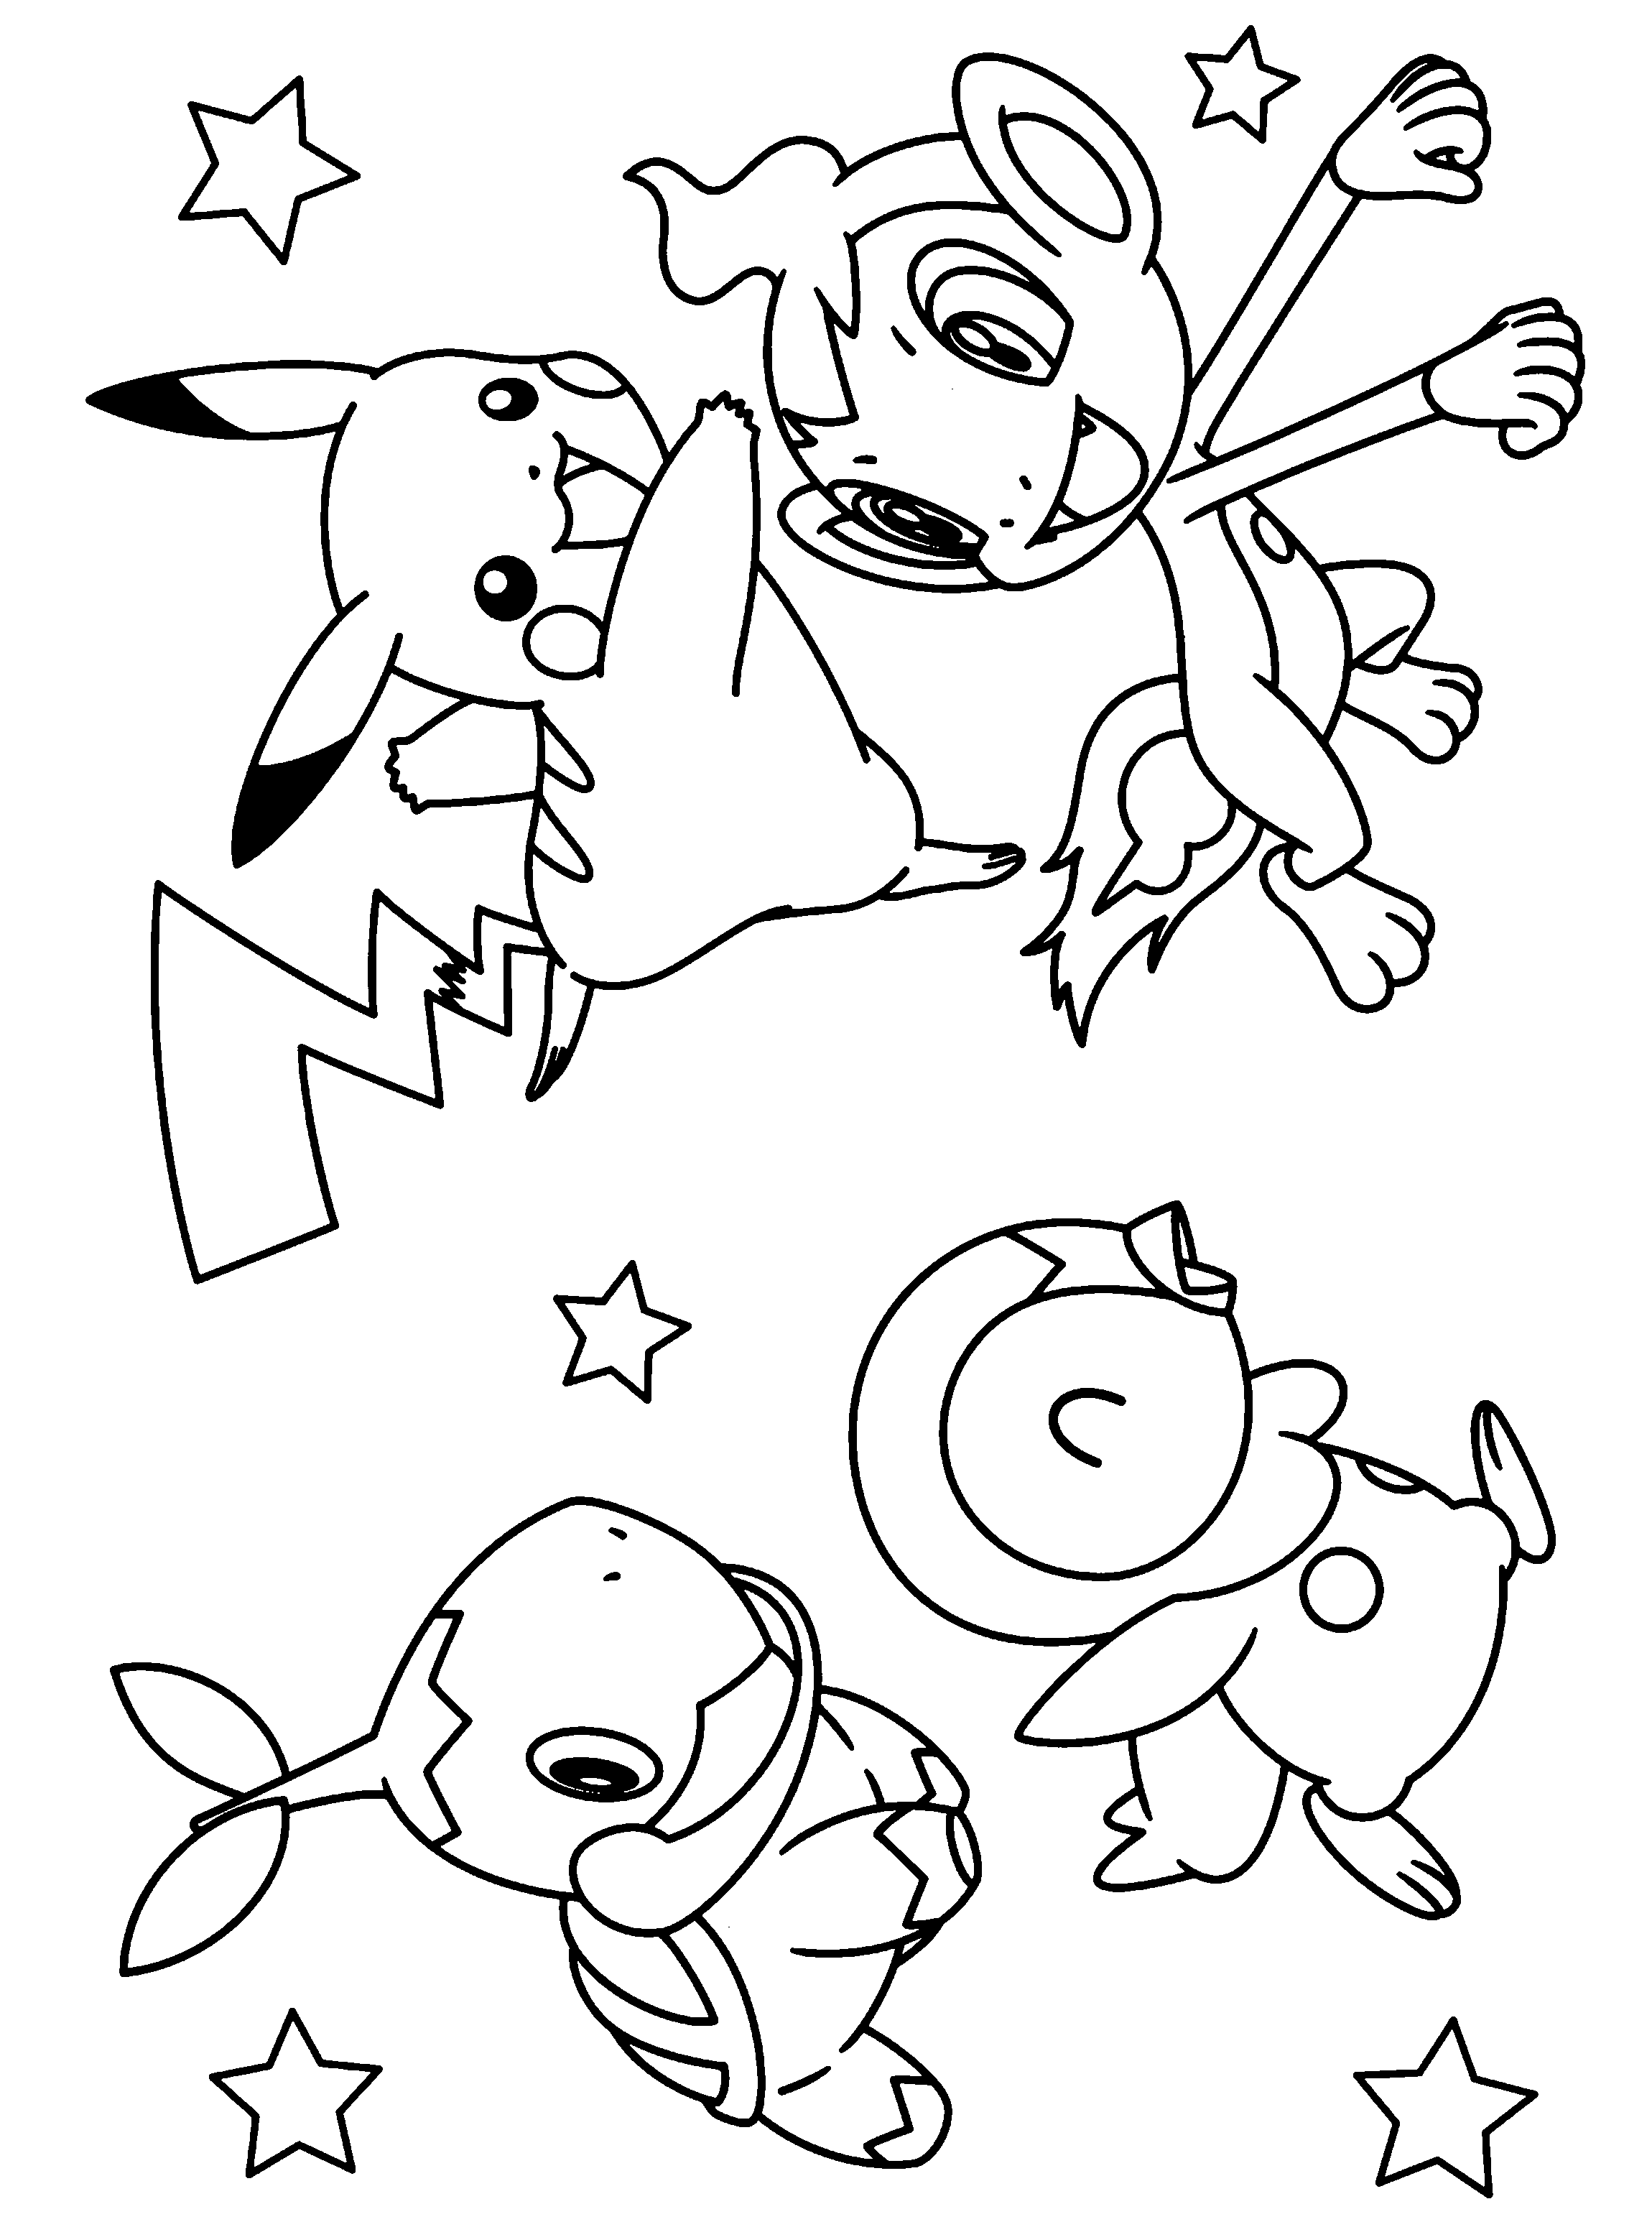 Free Pokemon | Coloring Pages For Adults, Download Free Pokemon